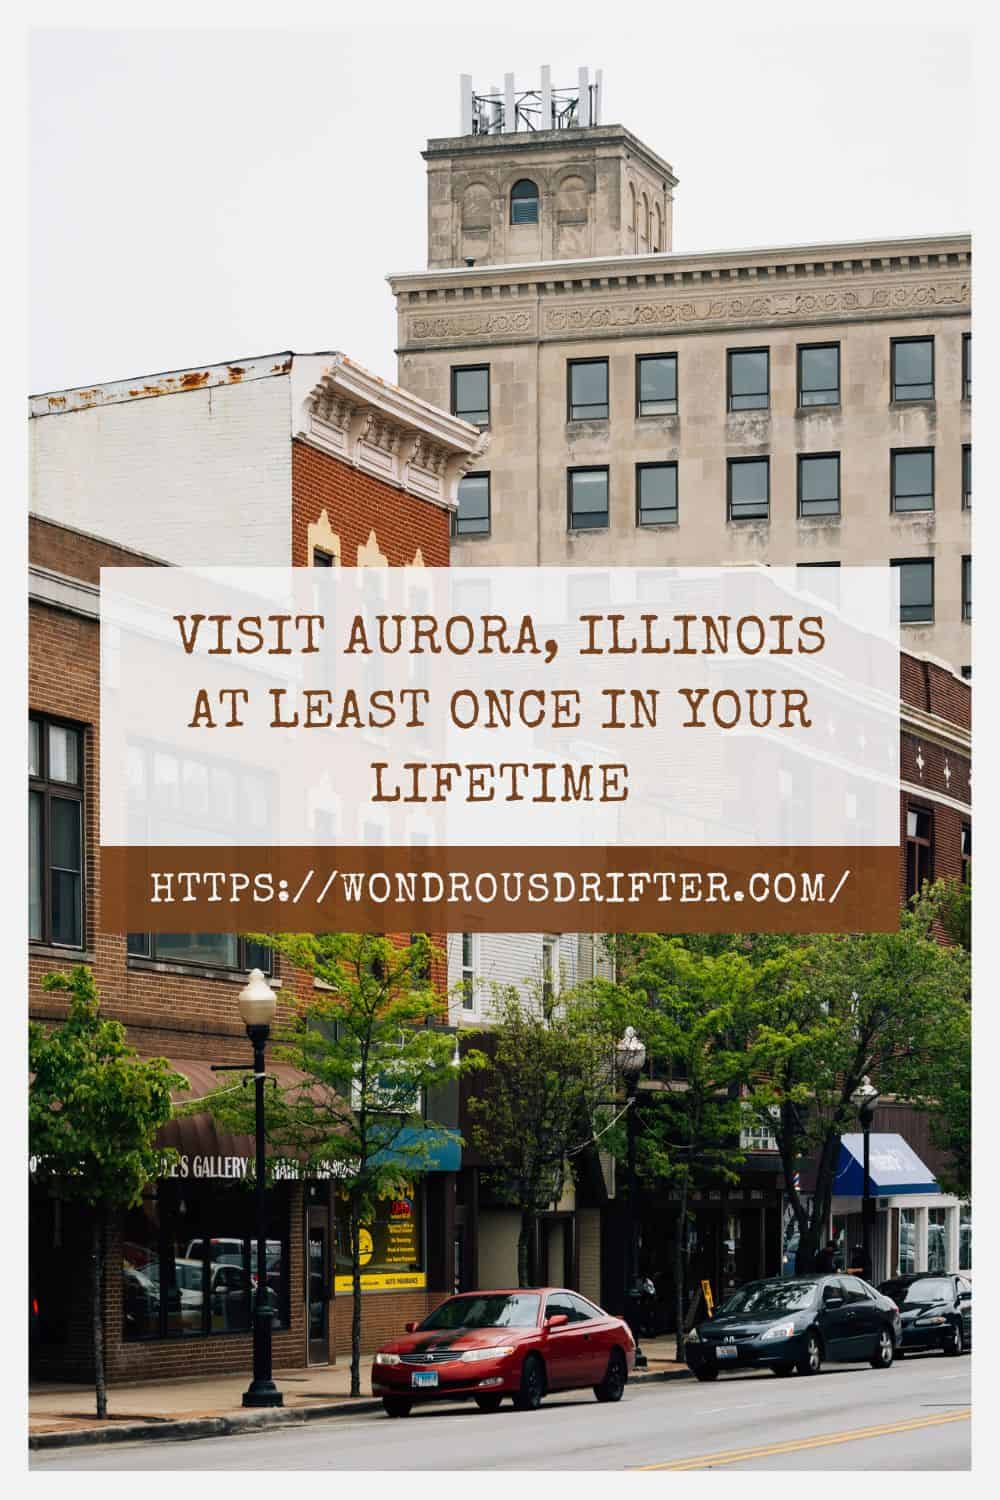 Visit Aurora Illinois at least once in your lifetime